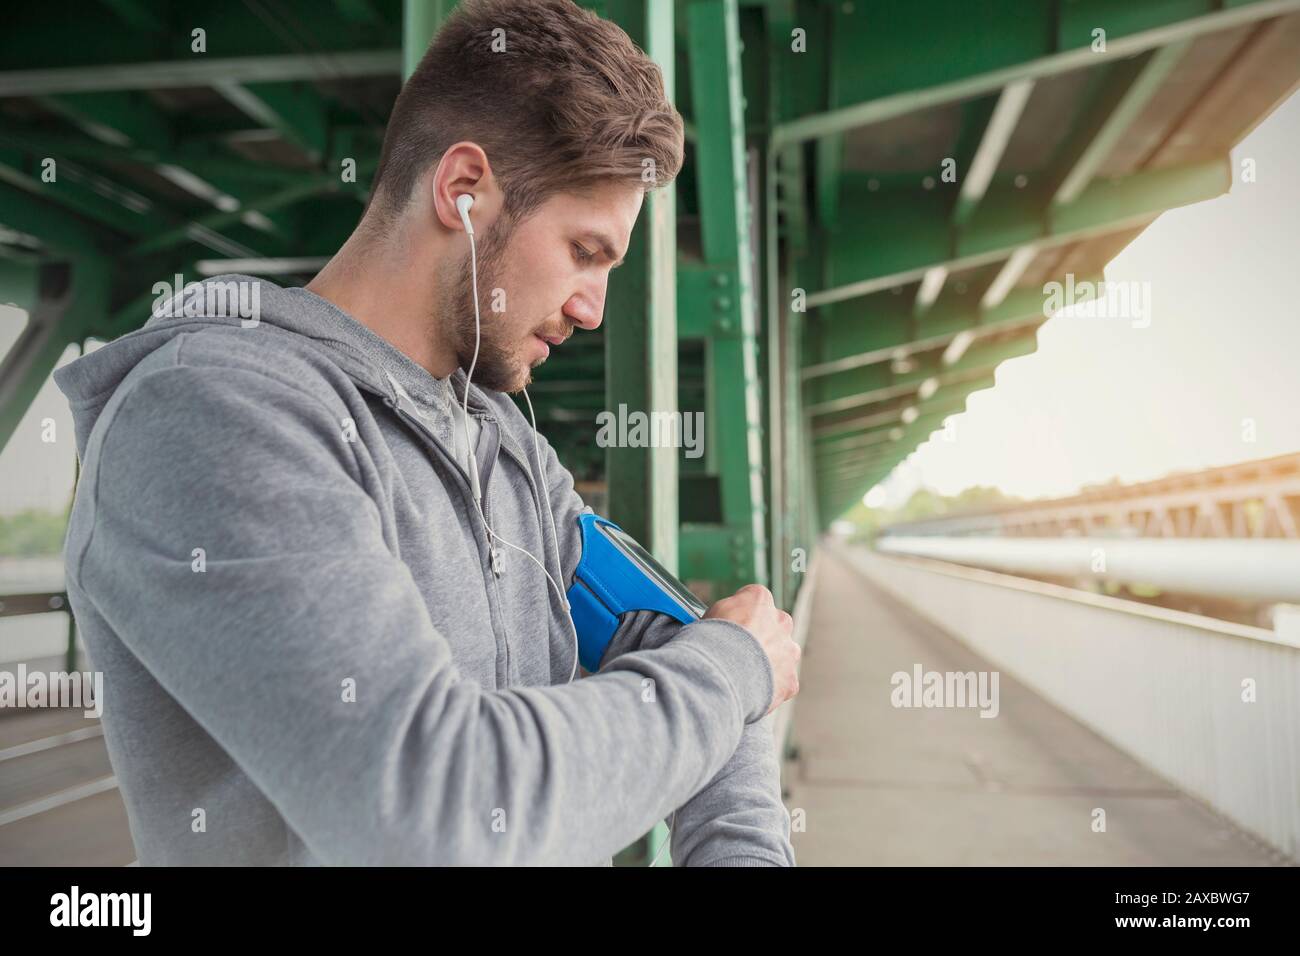 Young male runner listening to music with headphones and mp3 player arm band Stock Photo